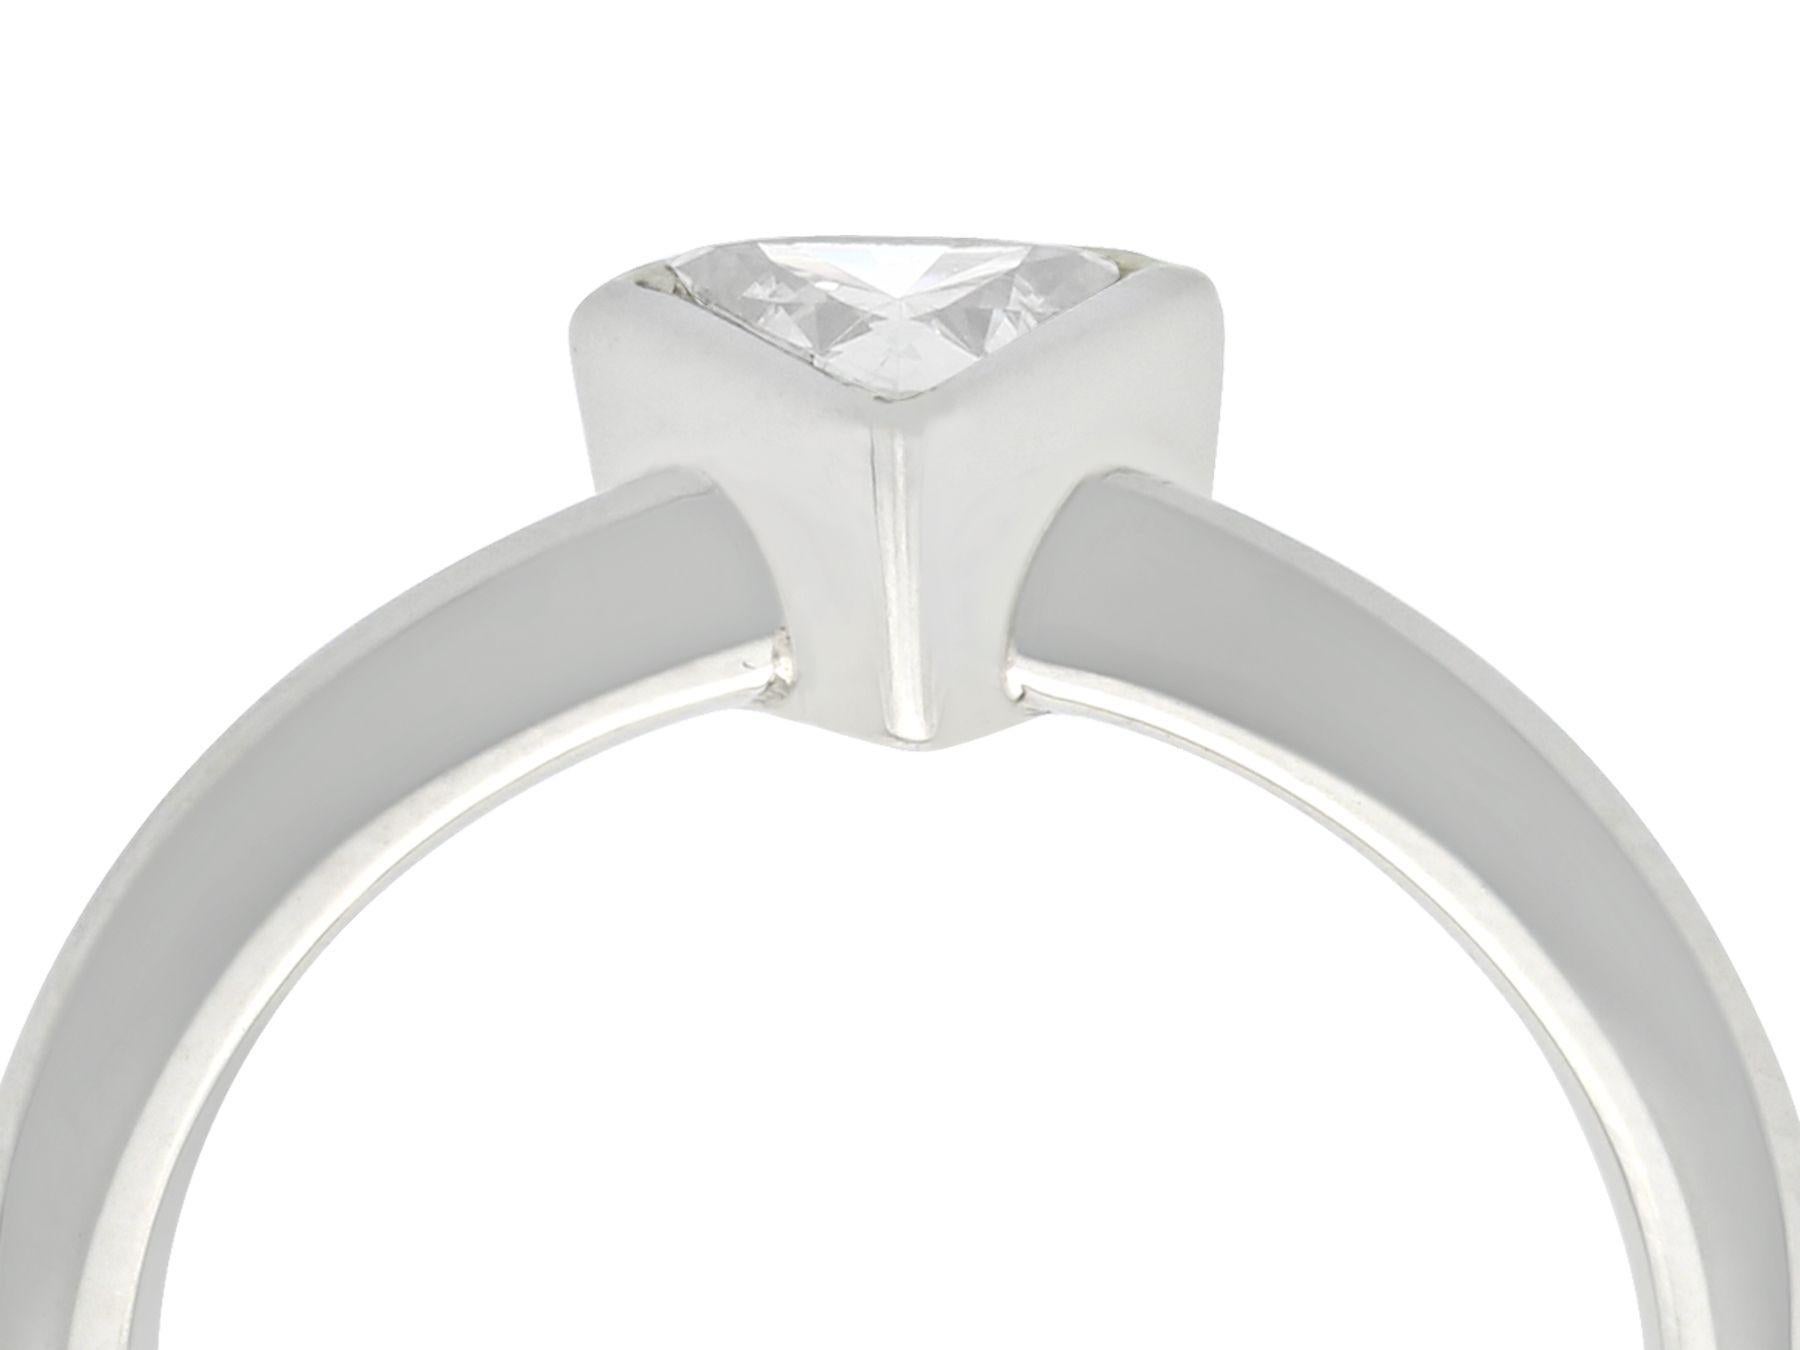 A fine 0.31 carat trillion cut diamond and platinum solitaire ring; part of our diverse diamond jewelry and estate jewelry collections

This fine trillion solitaire ring has been crafted in platinum

The 0.31Ct trillion cut diamond is bezel set